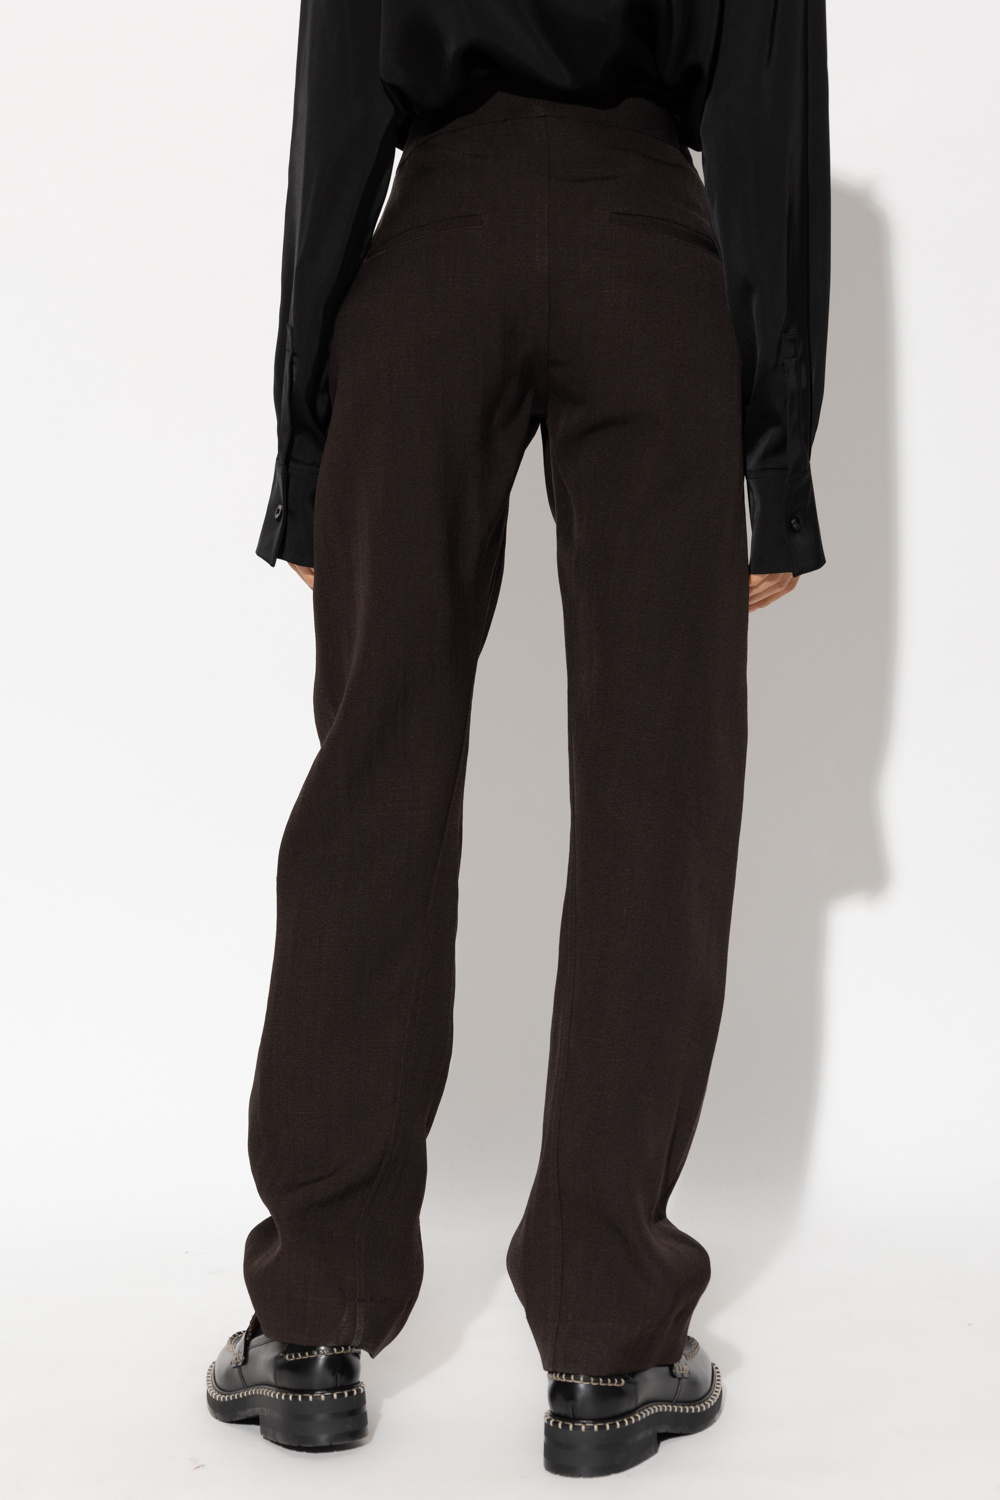 JIL SANDER Trousers with tapered legs